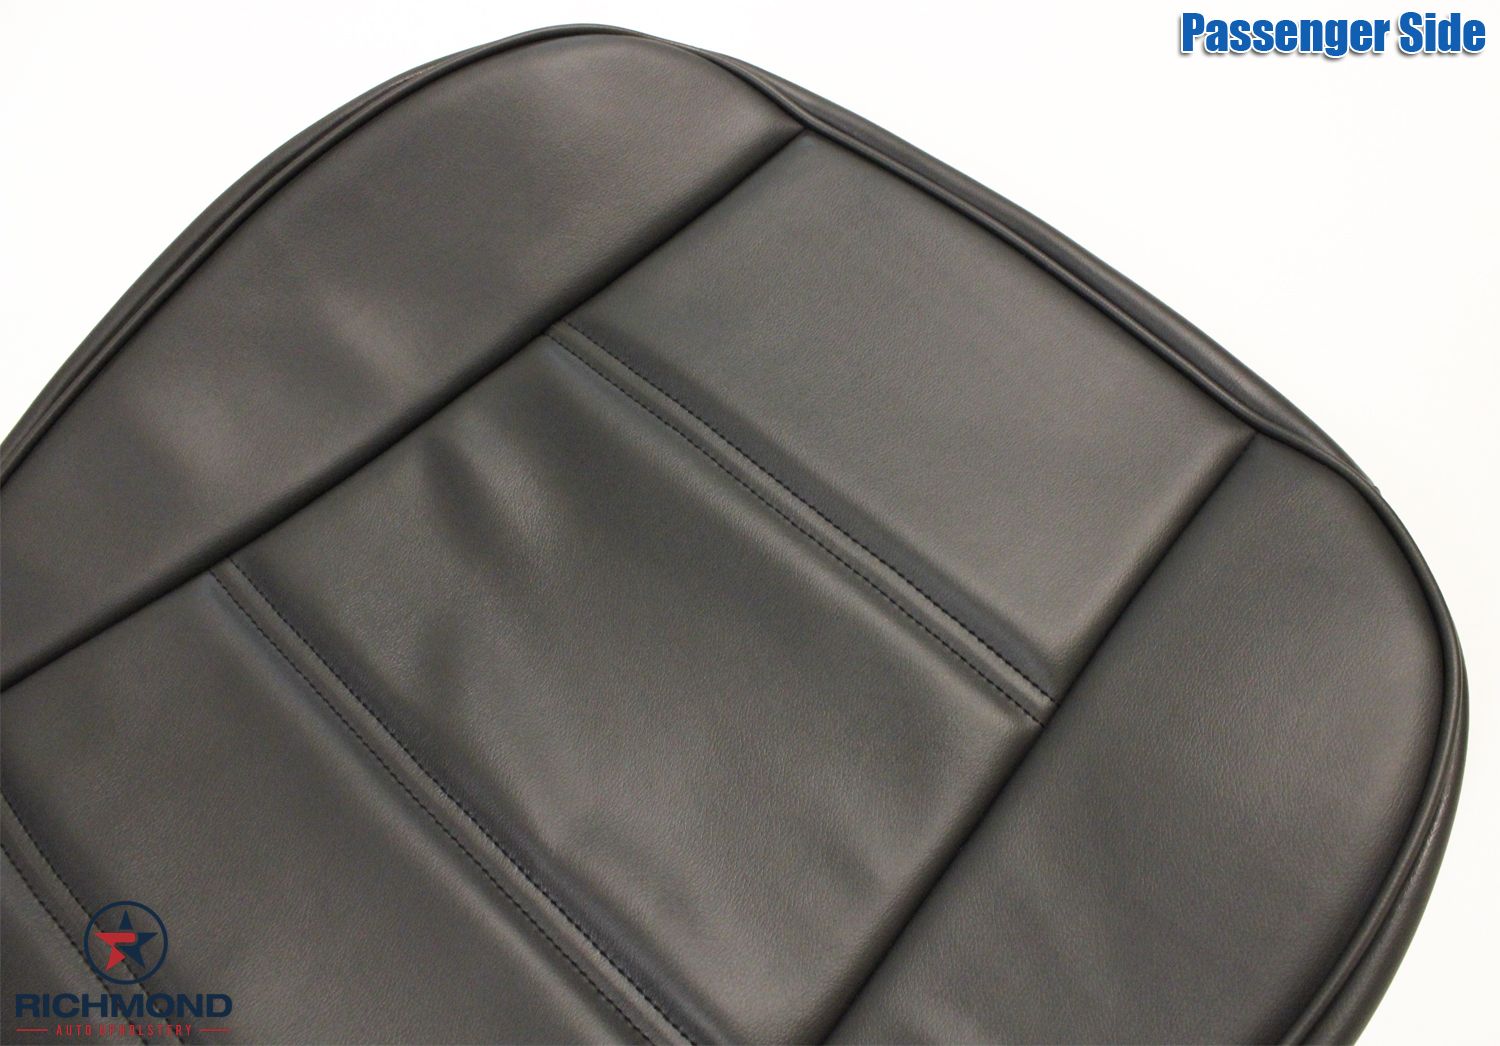  photo 99-04-Ford-Mustang-V6-Passenger-Side-Bottom-Replacement-Leather-Seat-Cover-Dark-Charcoal-Gray-5_zpsnxq6kijv.jpg